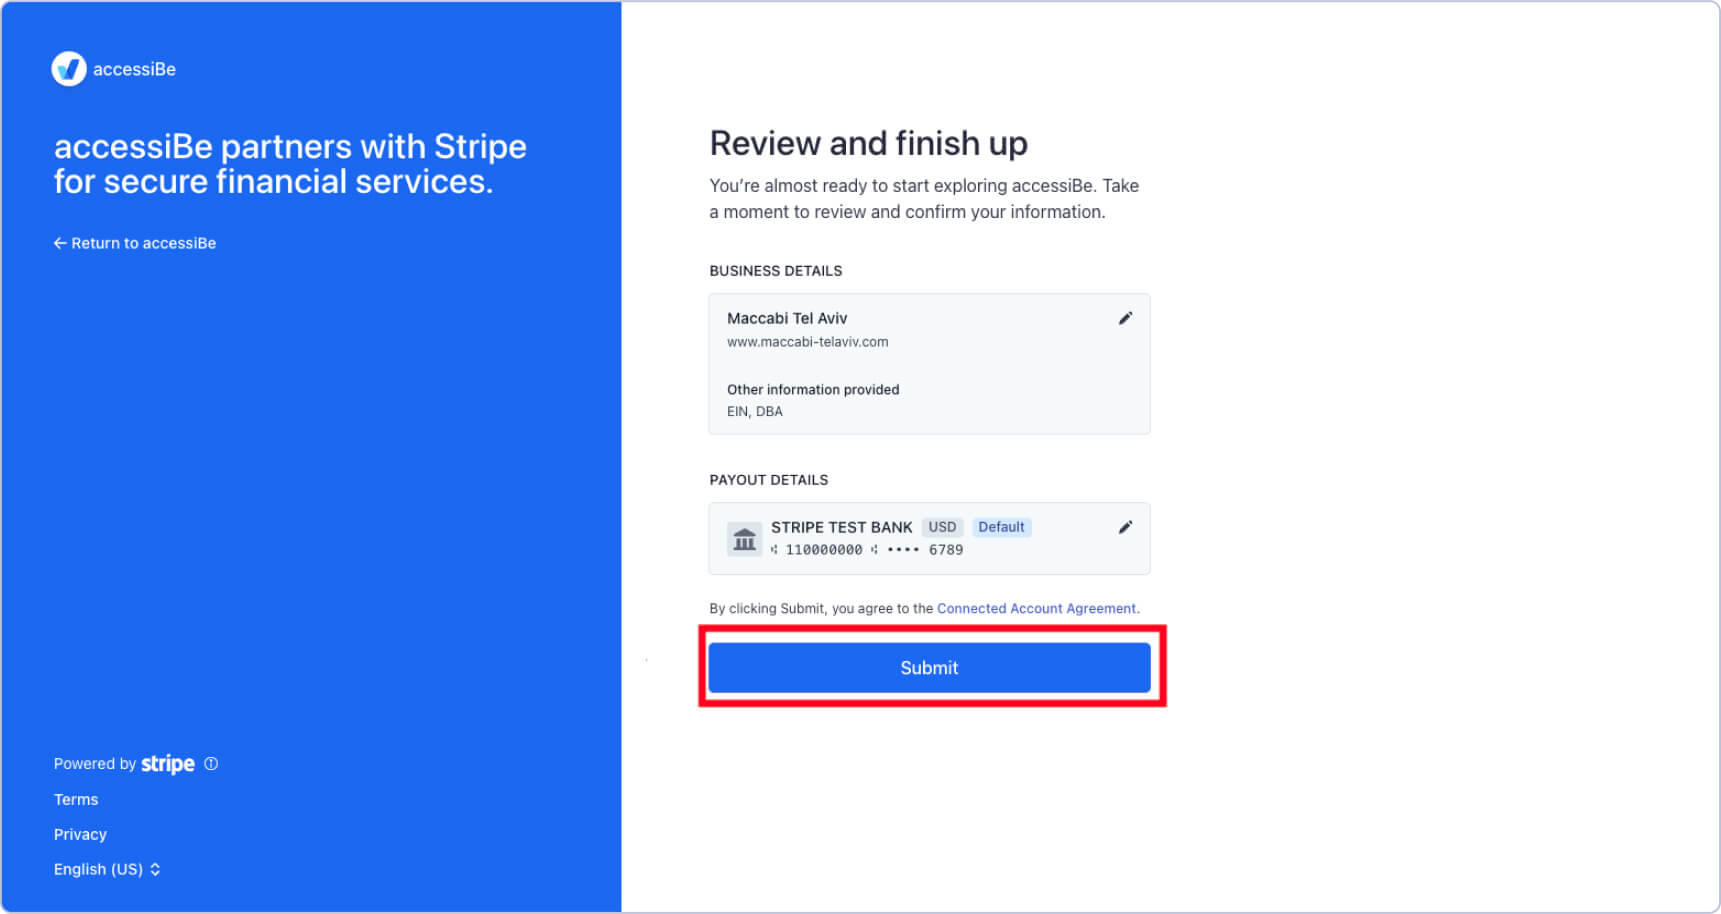 Screenshot of the next step of setting up your Stripe account - Review and Finish your setup, highlighting the Submit call to action button